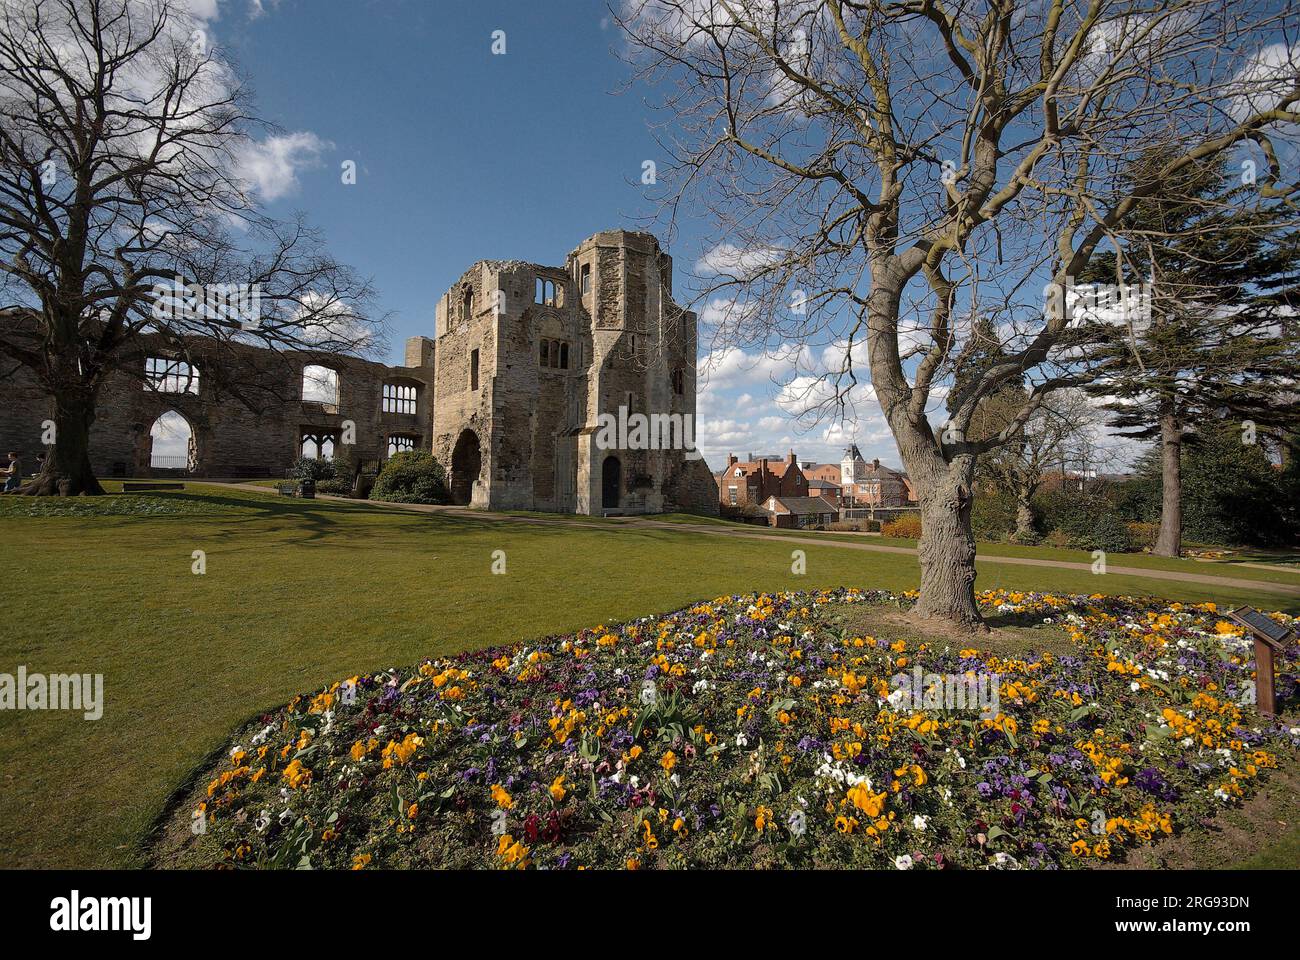 View of Newark Castle, Newark-on-Trent, Nottinghamshire, from inside the walls.  The building was reconstructed in the early 13th century, and King John of England died there on the night of 18 October 1216. Stock Photo